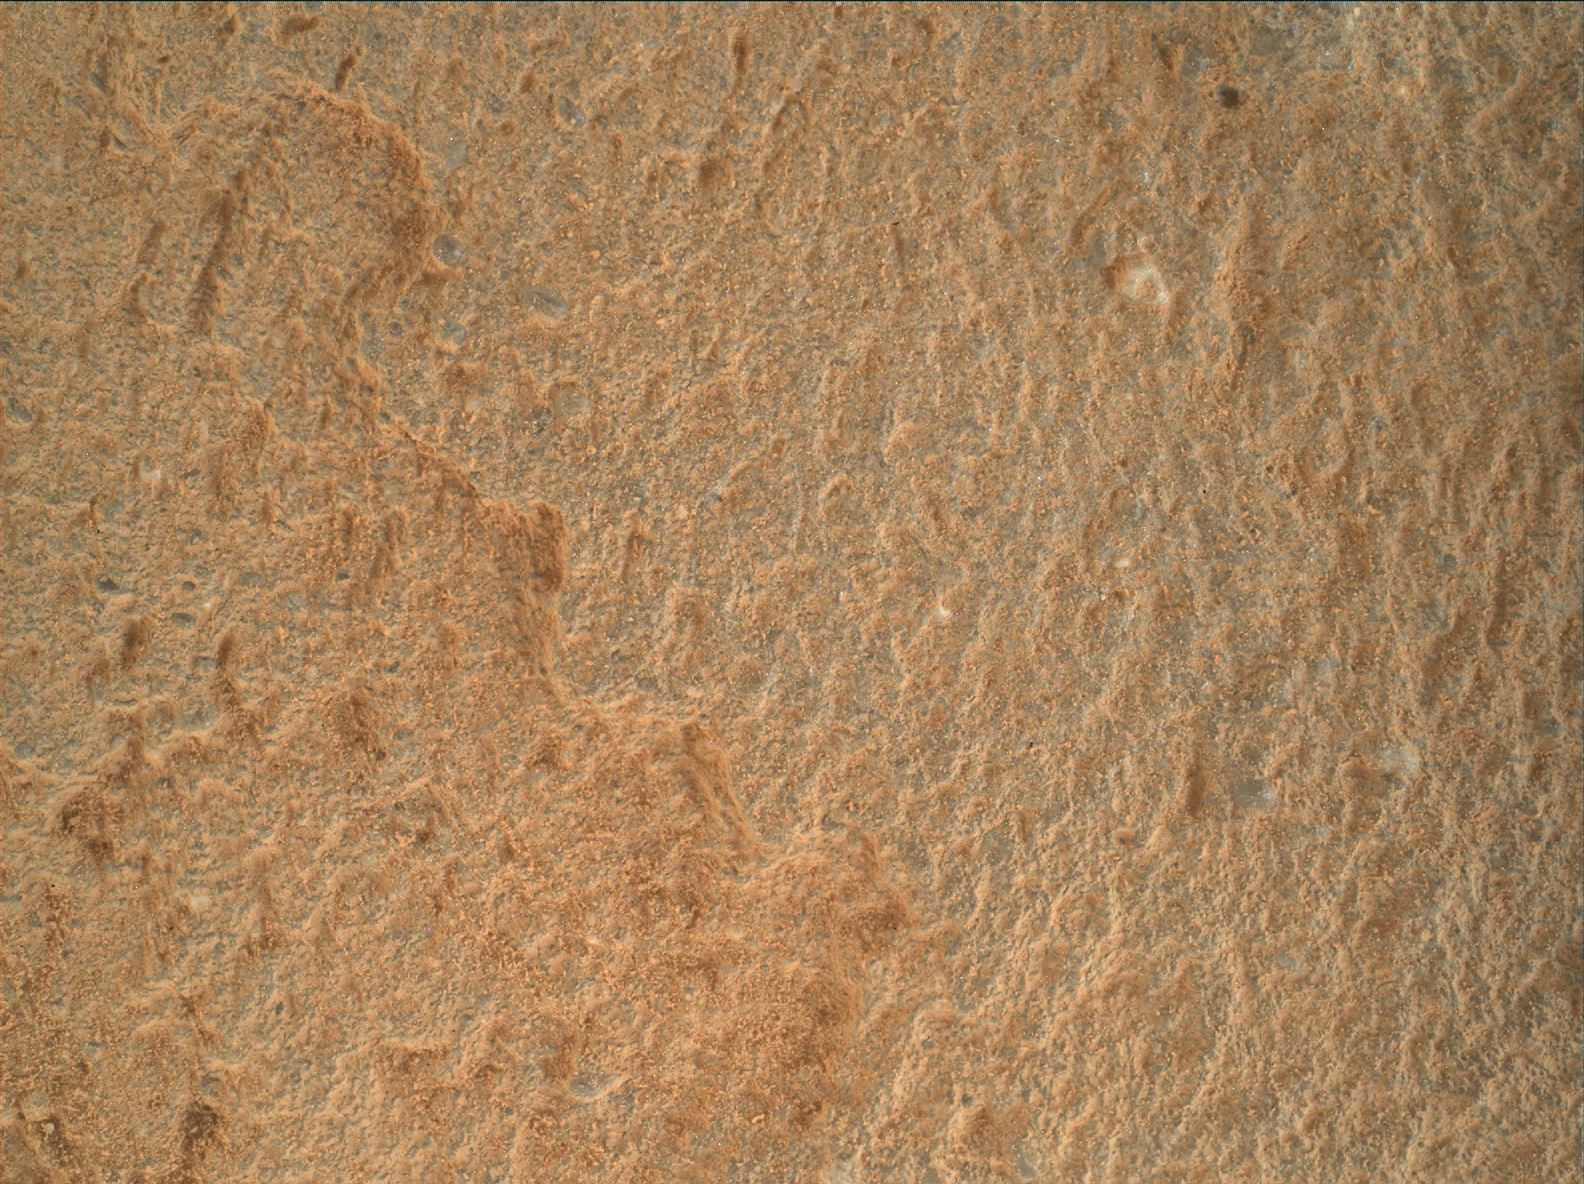 Nasa's Mars rover Curiosity acquired this image using its Mars Hand Lens Imager (MAHLI) on Sol 2698